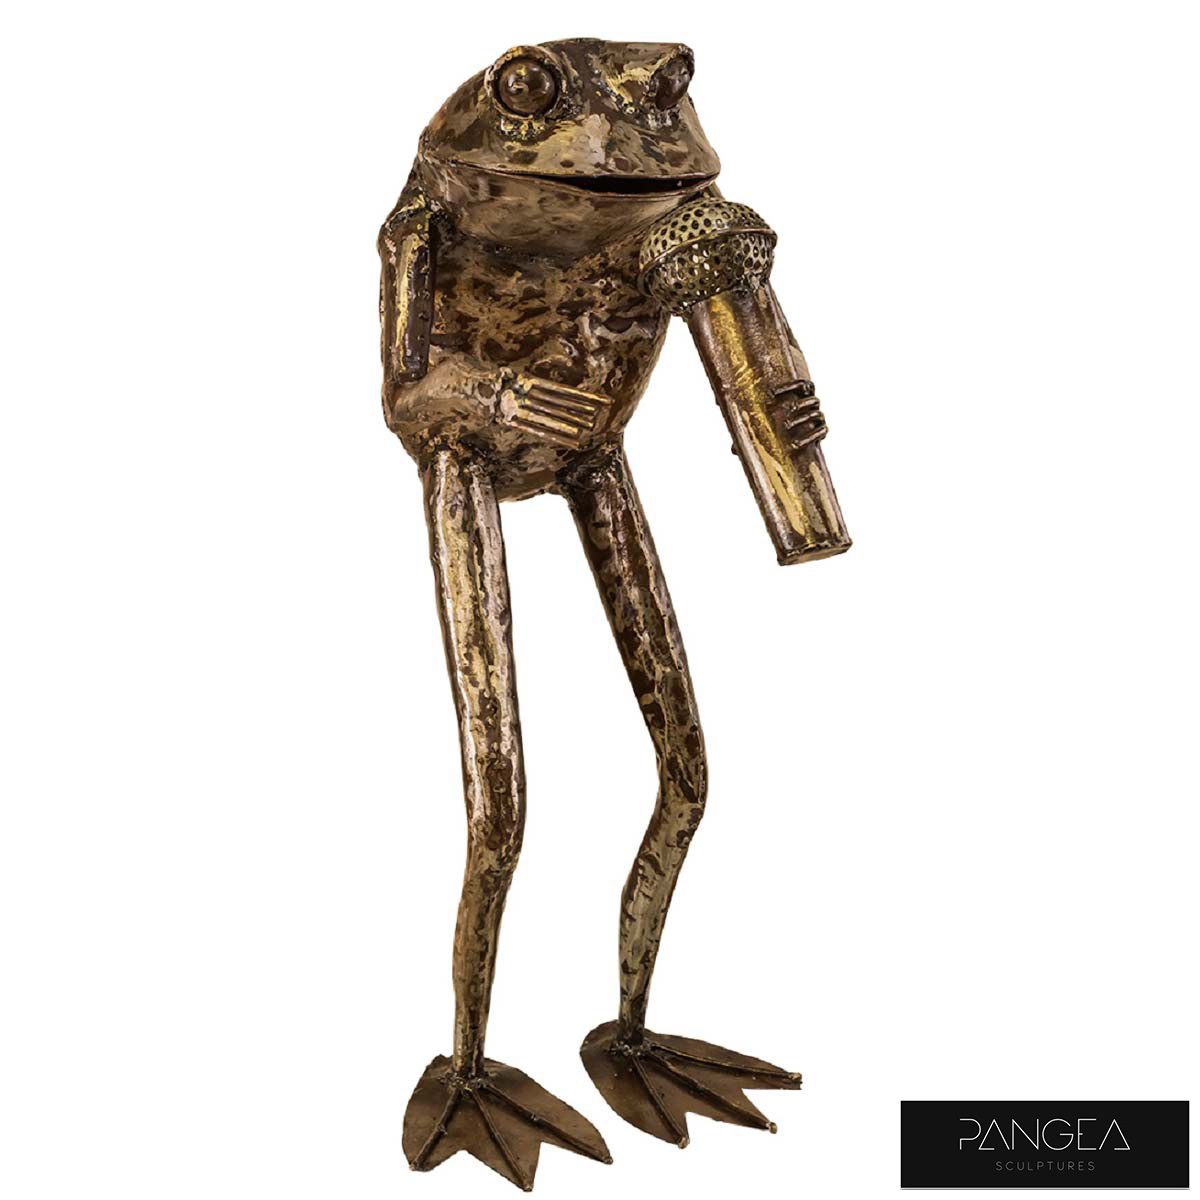 Pangea 2.6ft (79.2cm) Frog Ornamental Metal Structure - Microphone